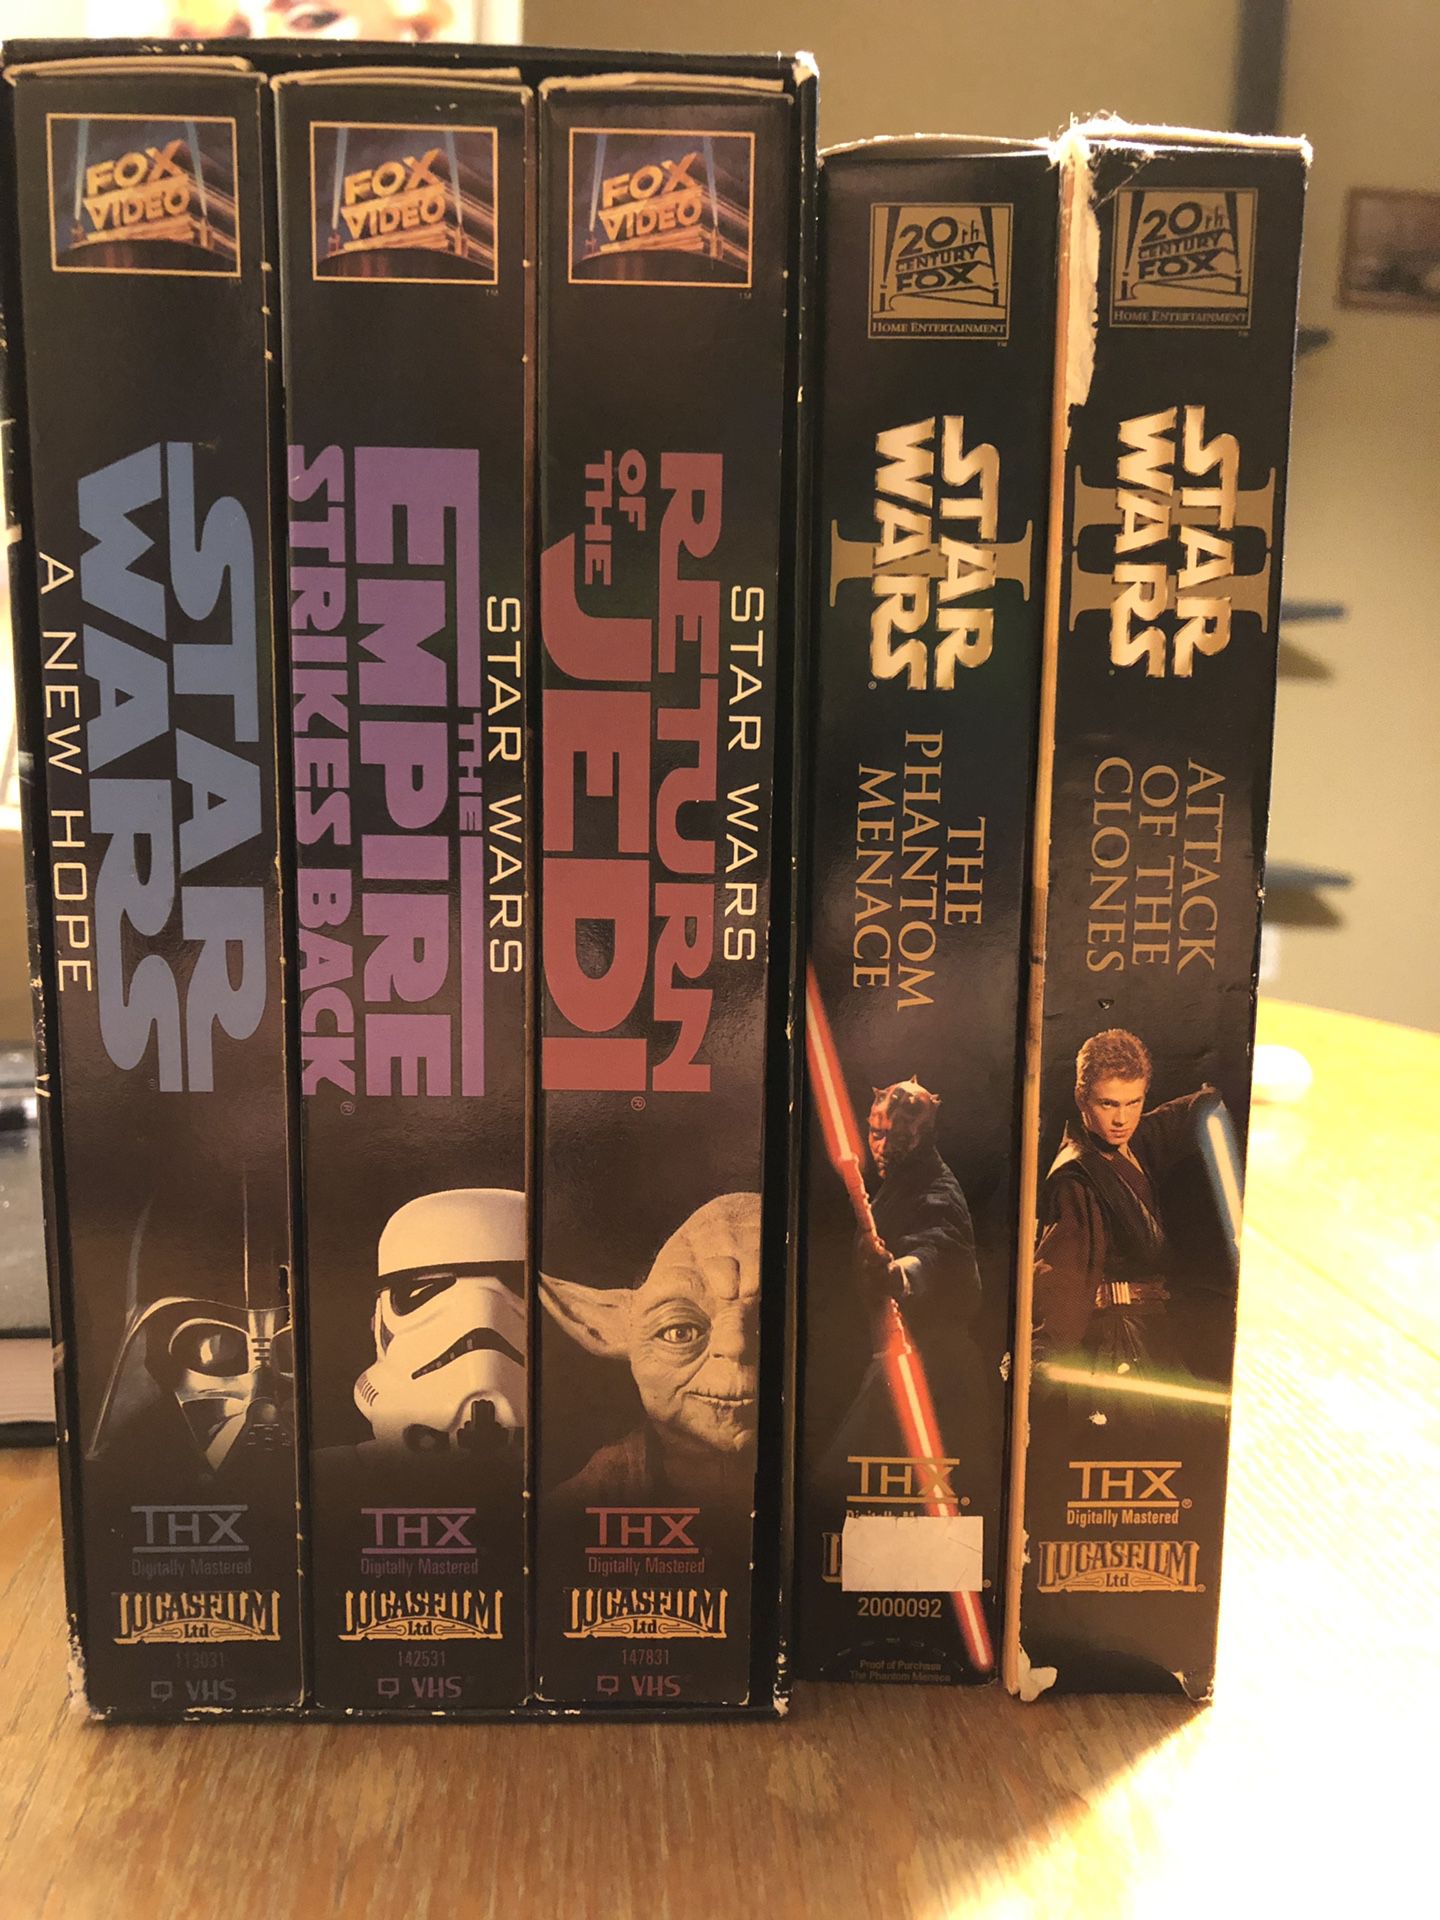 Complete original trilogy and one and two